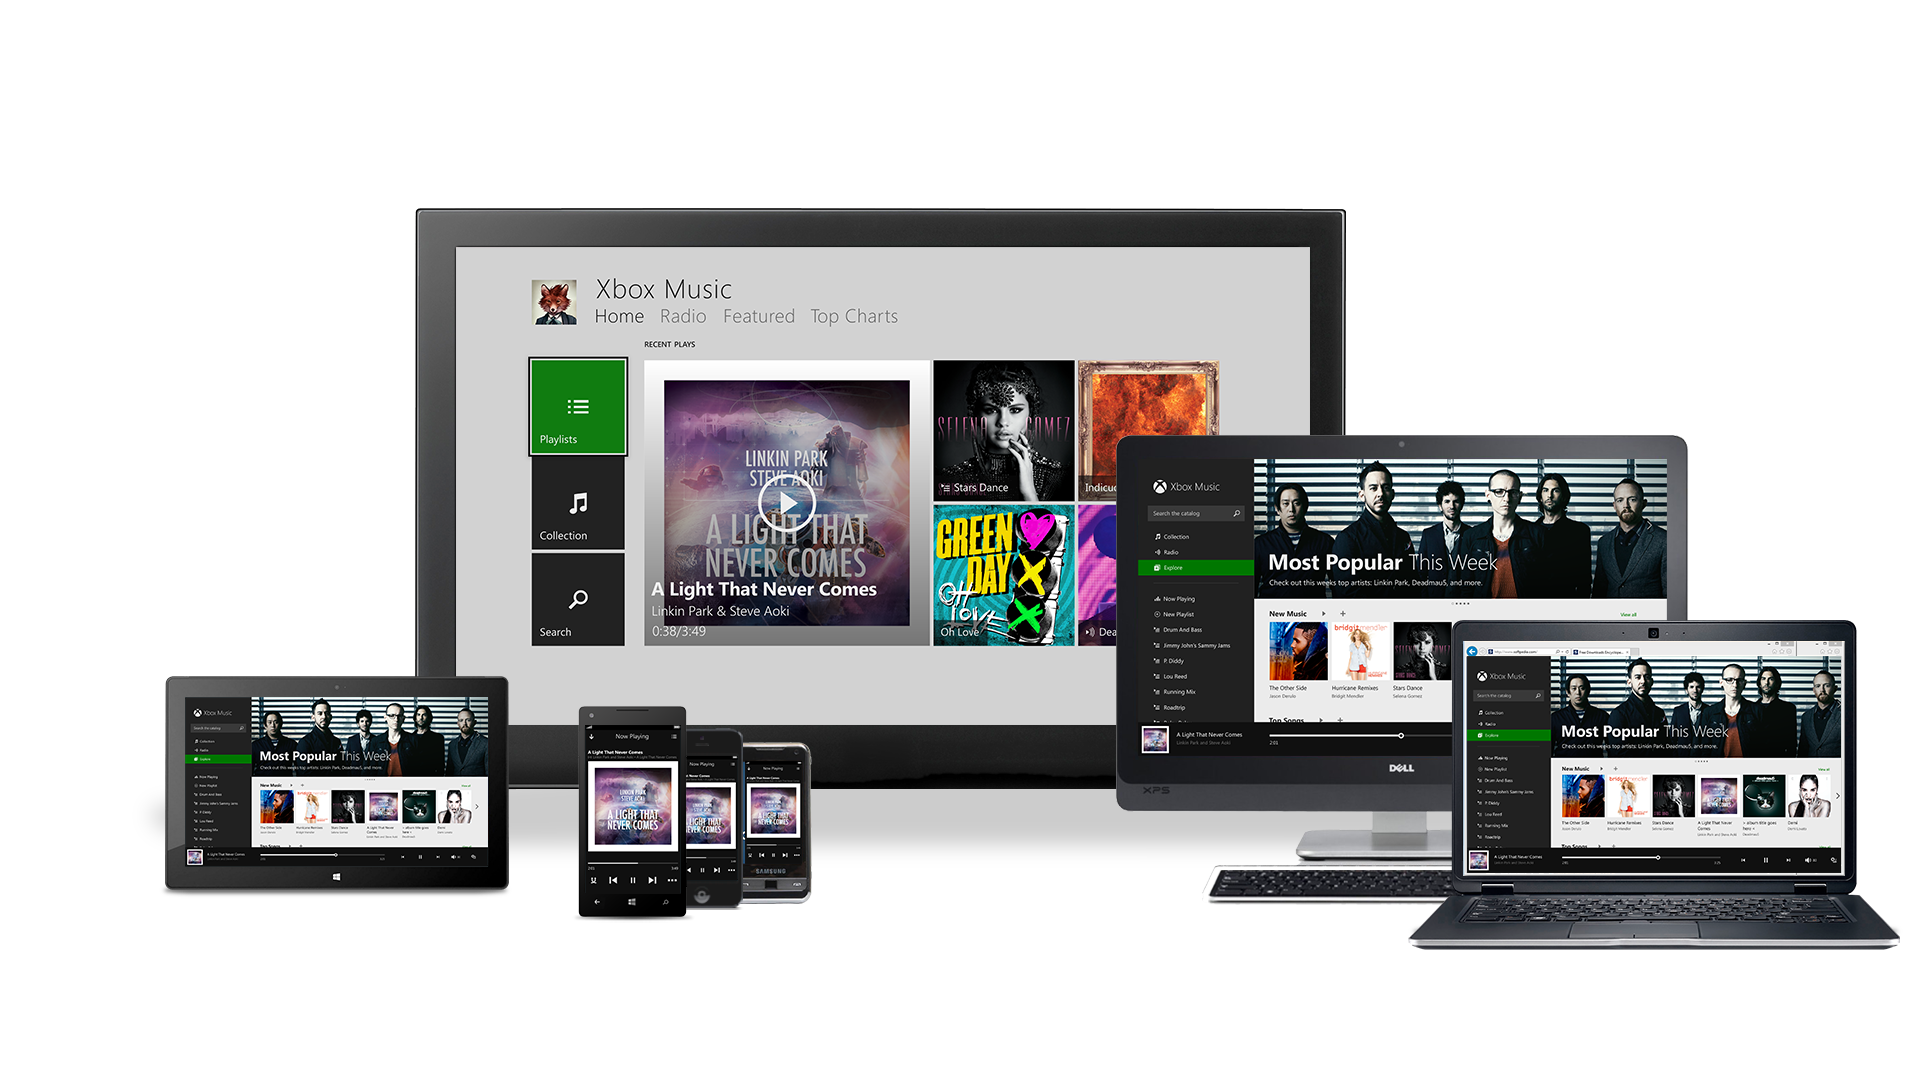 Xbox Video for Windows 8.1 Gets Major Redesign – Free Download